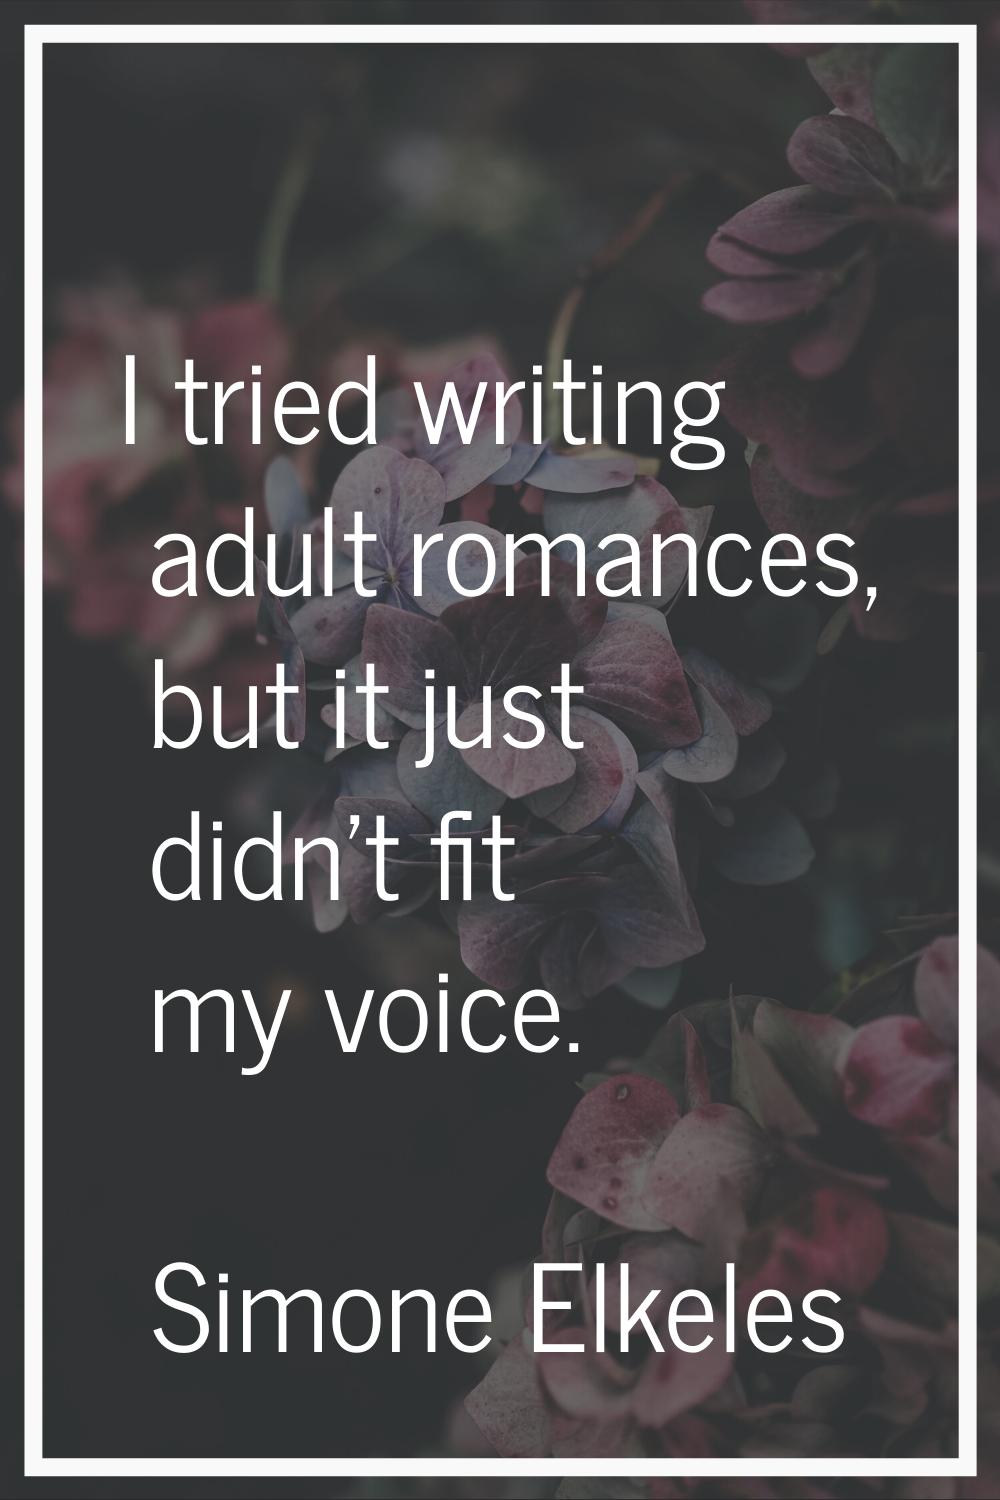 I tried writing adult romances, but it just didn't fit my voice.